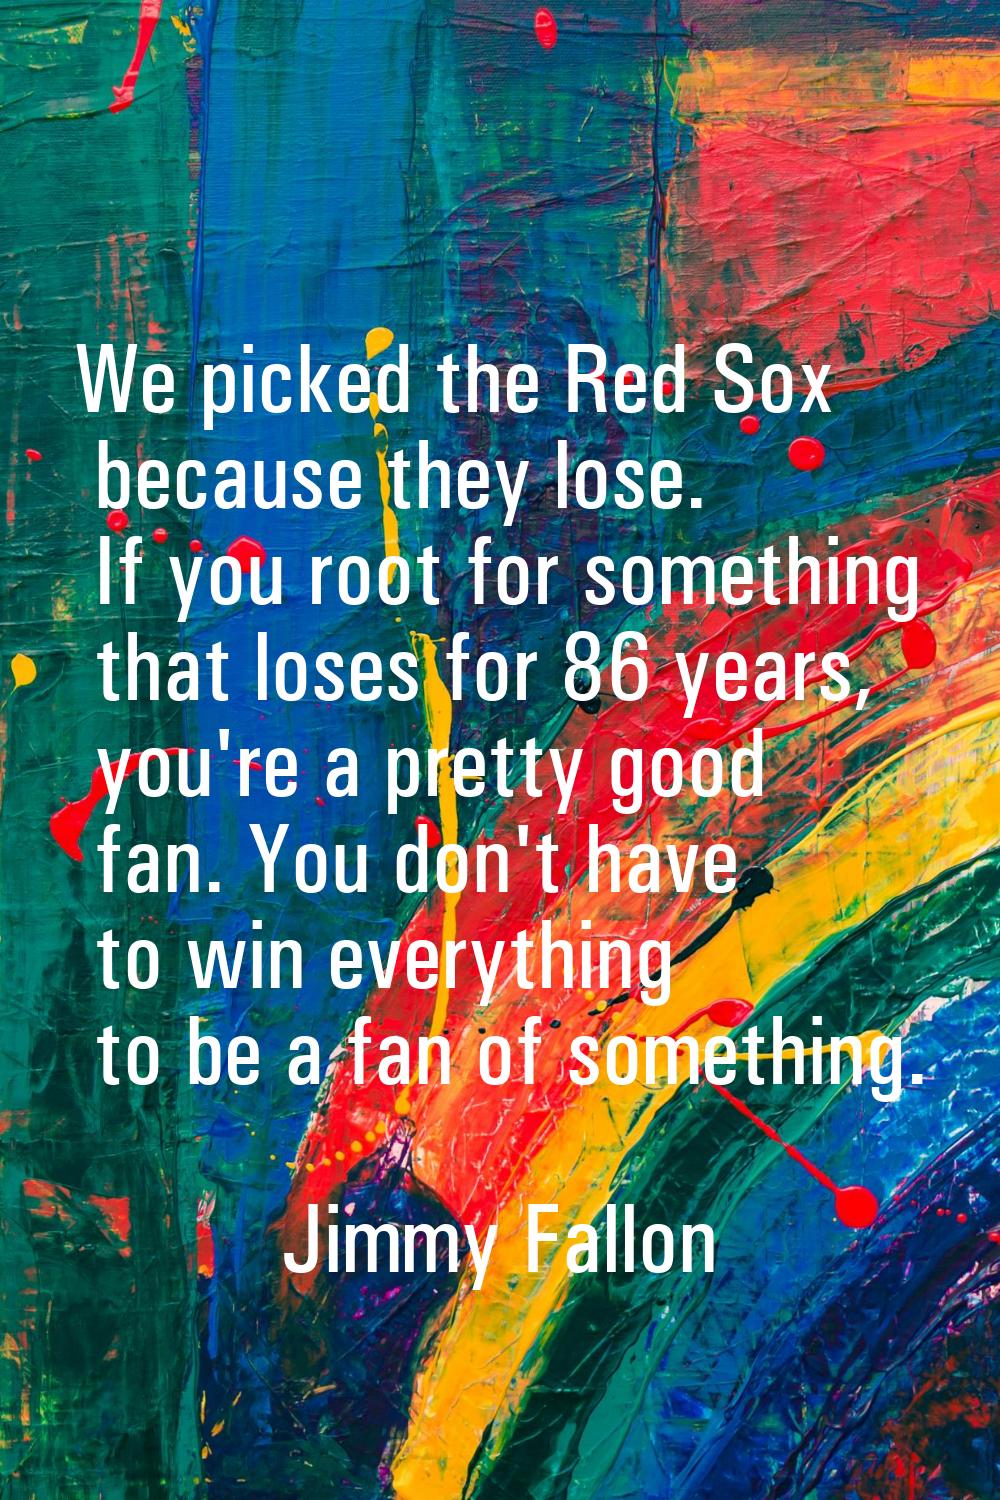 We picked the Red Sox because they lose. If you root for something that loses for 86 years, you're 